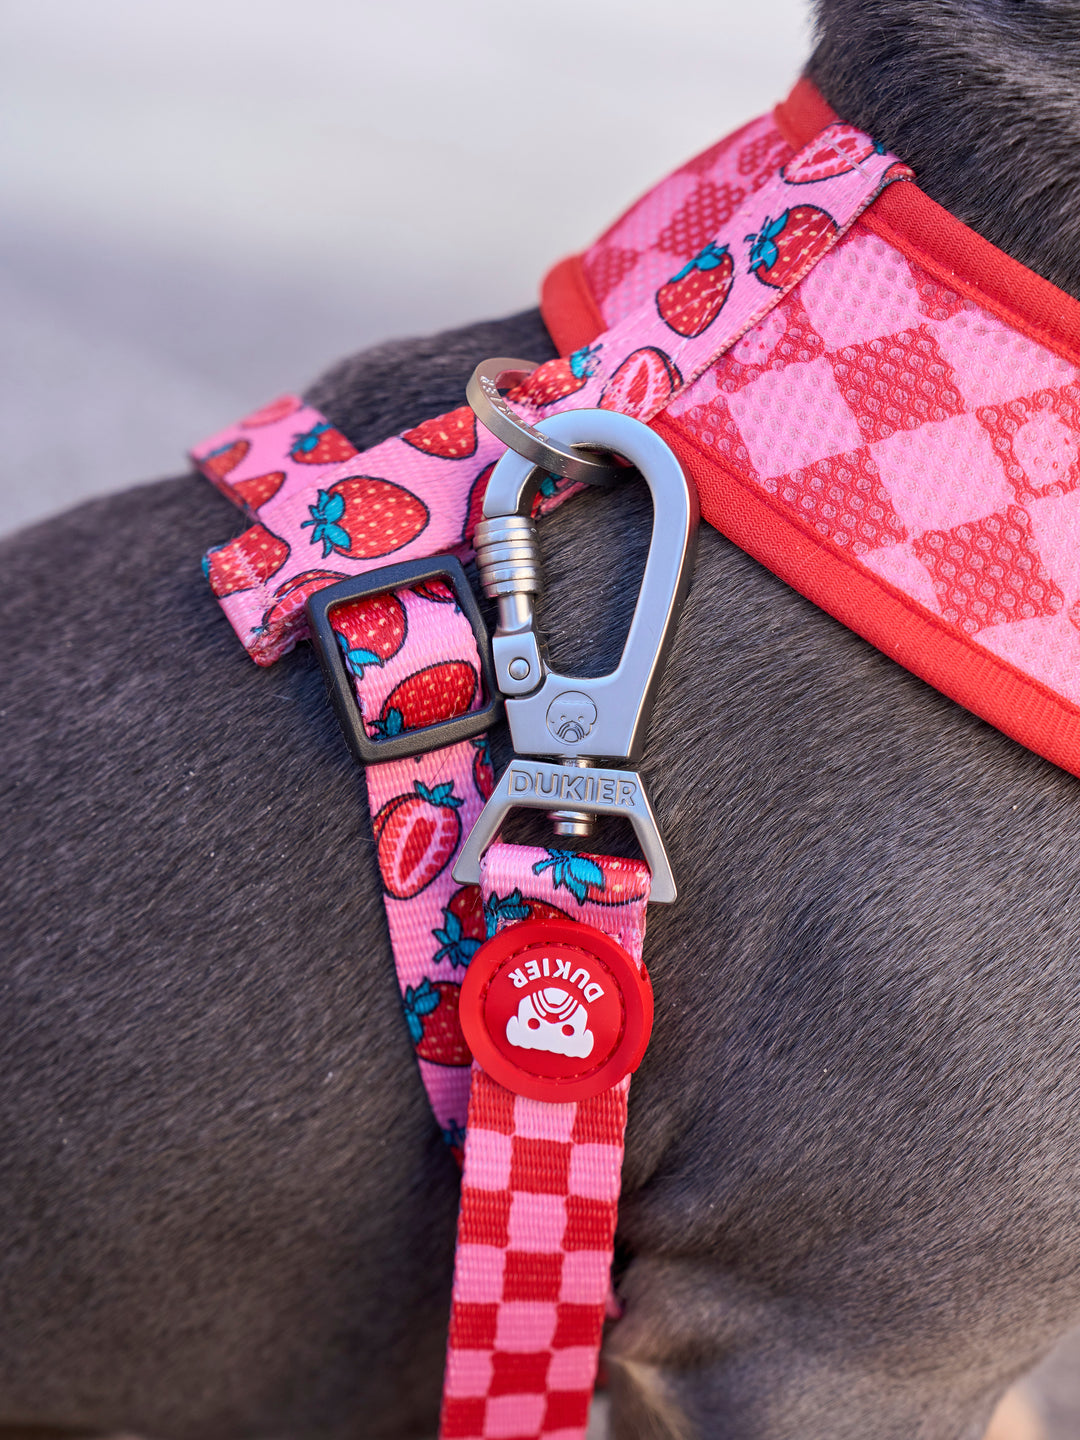 BERRY LOVE REVERSIBLE DOG HARNESS